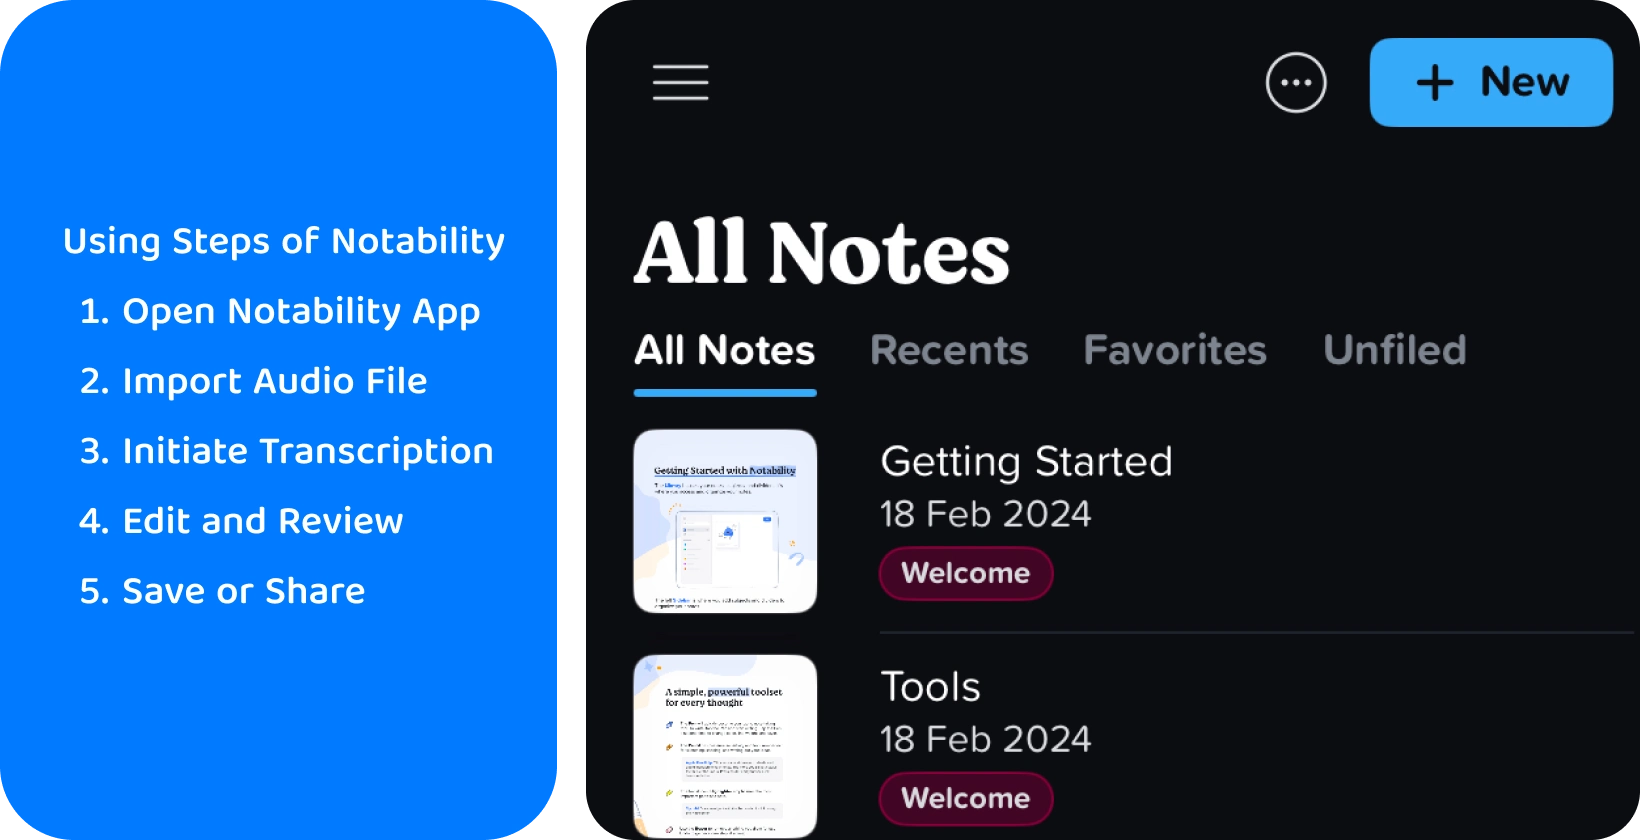 View of Notability's All Notes screen, highlighting tools for audio-to-text conversion on a digital device.